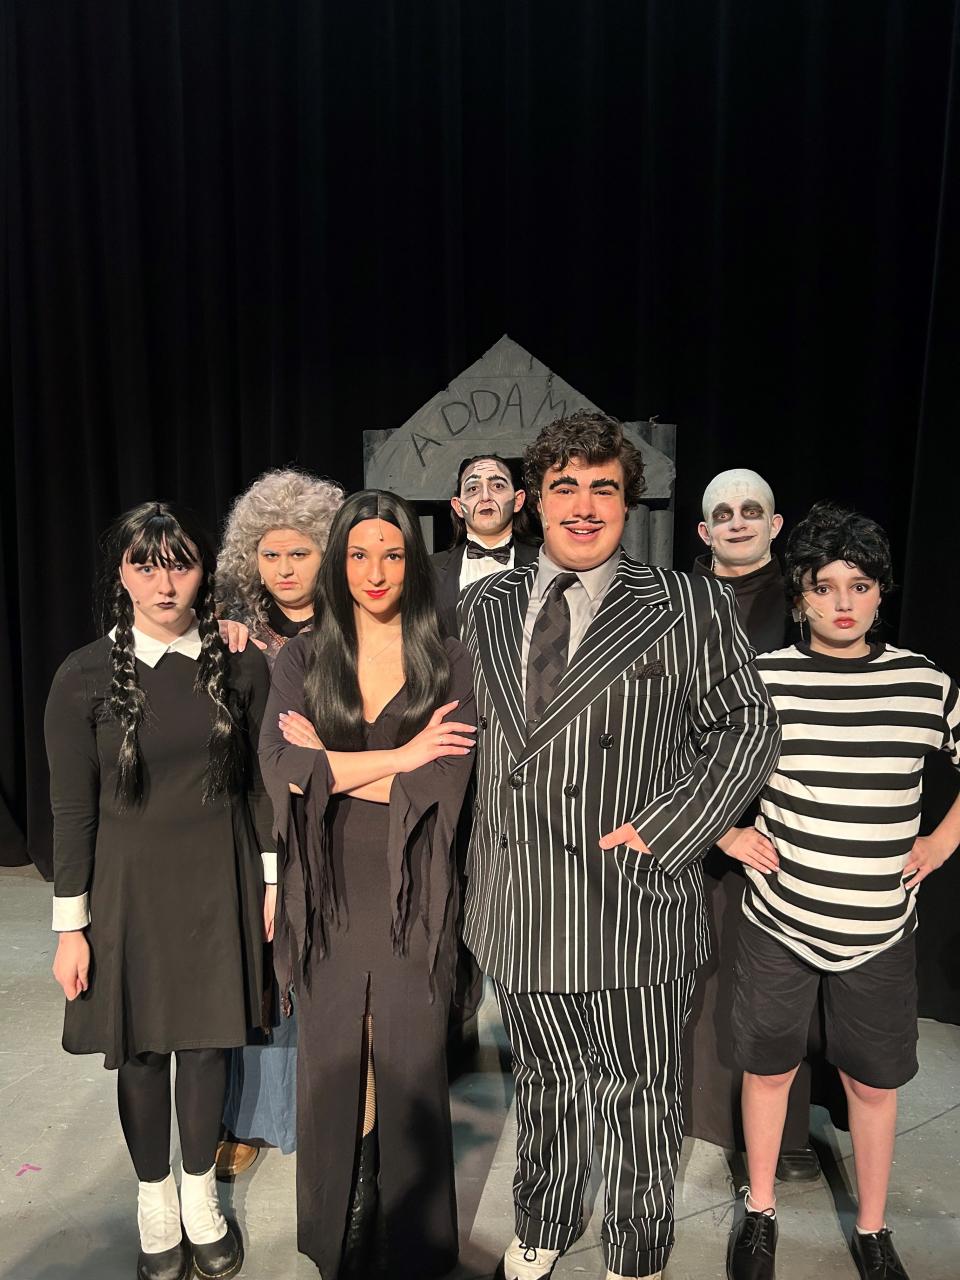 The cast of "The Addams Family" at Clarkstown High School North includes: Zach Degen (Gomez), Zoe Abrams (Morticia), Aster Barry (Wednesday), Natalie Berkowitz (Grandma), Elkin Frank (Lurch) Dylan Marvin (Fester) and Gianna Maltbie (Pugsley). Performances at 7 p.m., March 21, 22; 2 and 7 p.m., March 23